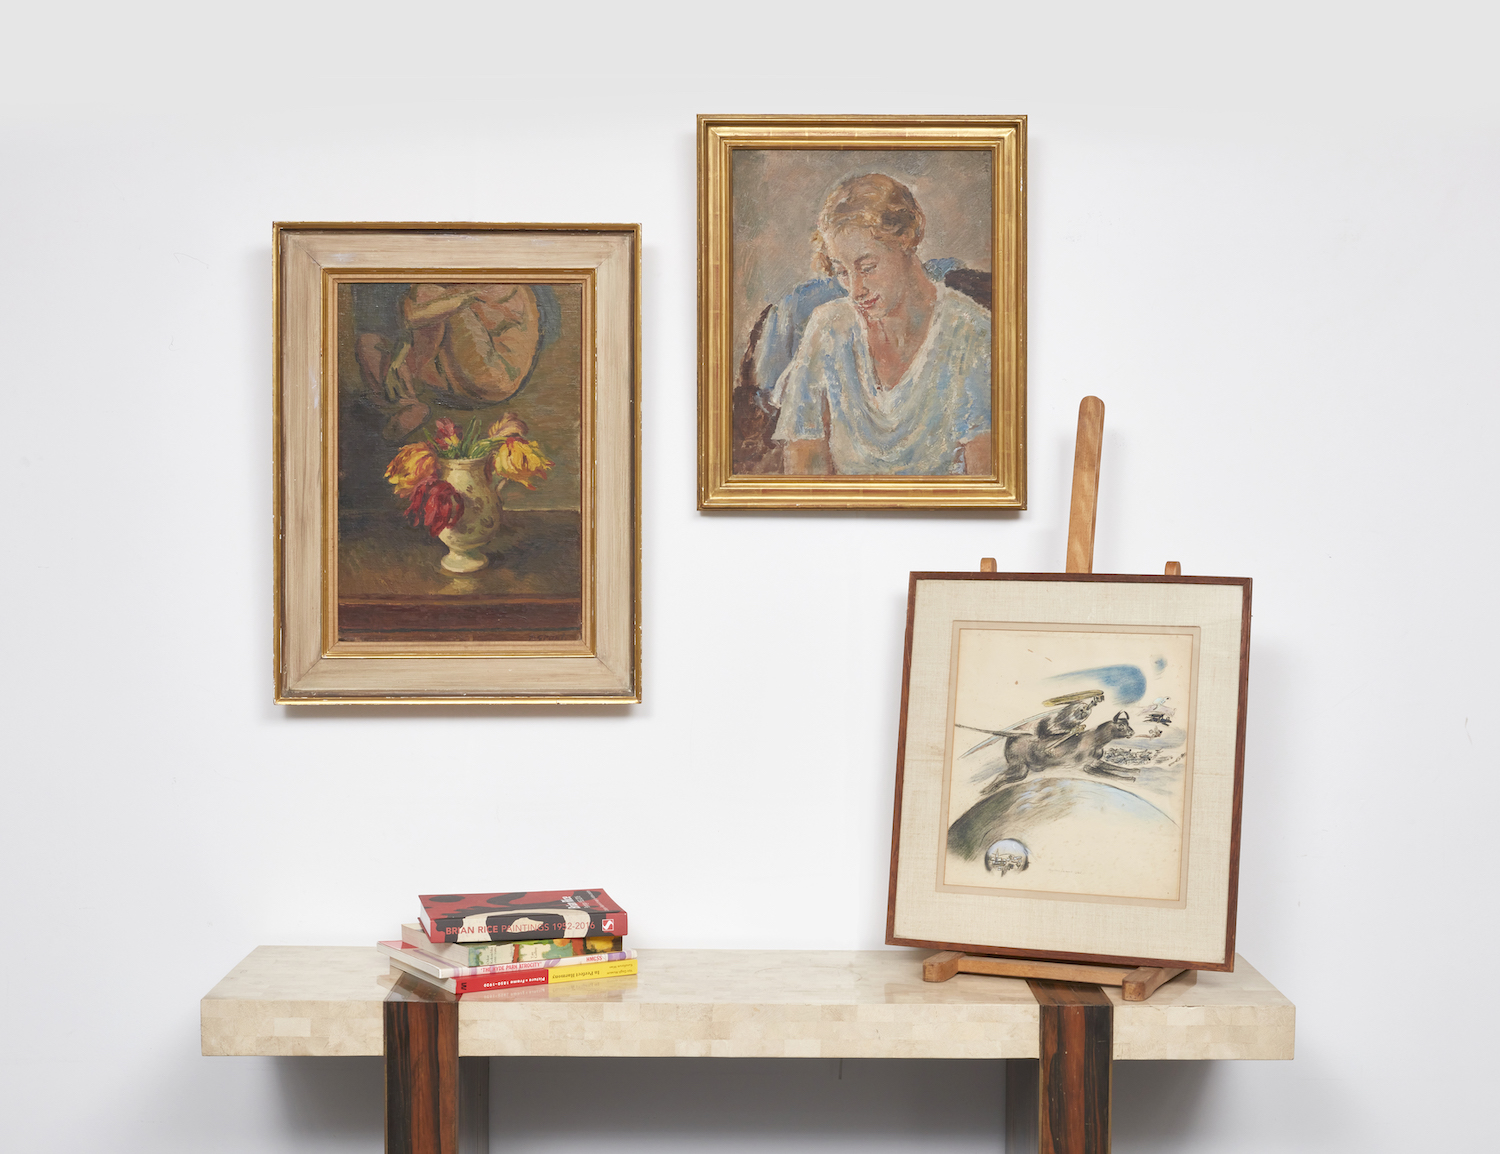 Artworks from the Collection of Bernard Sheridan